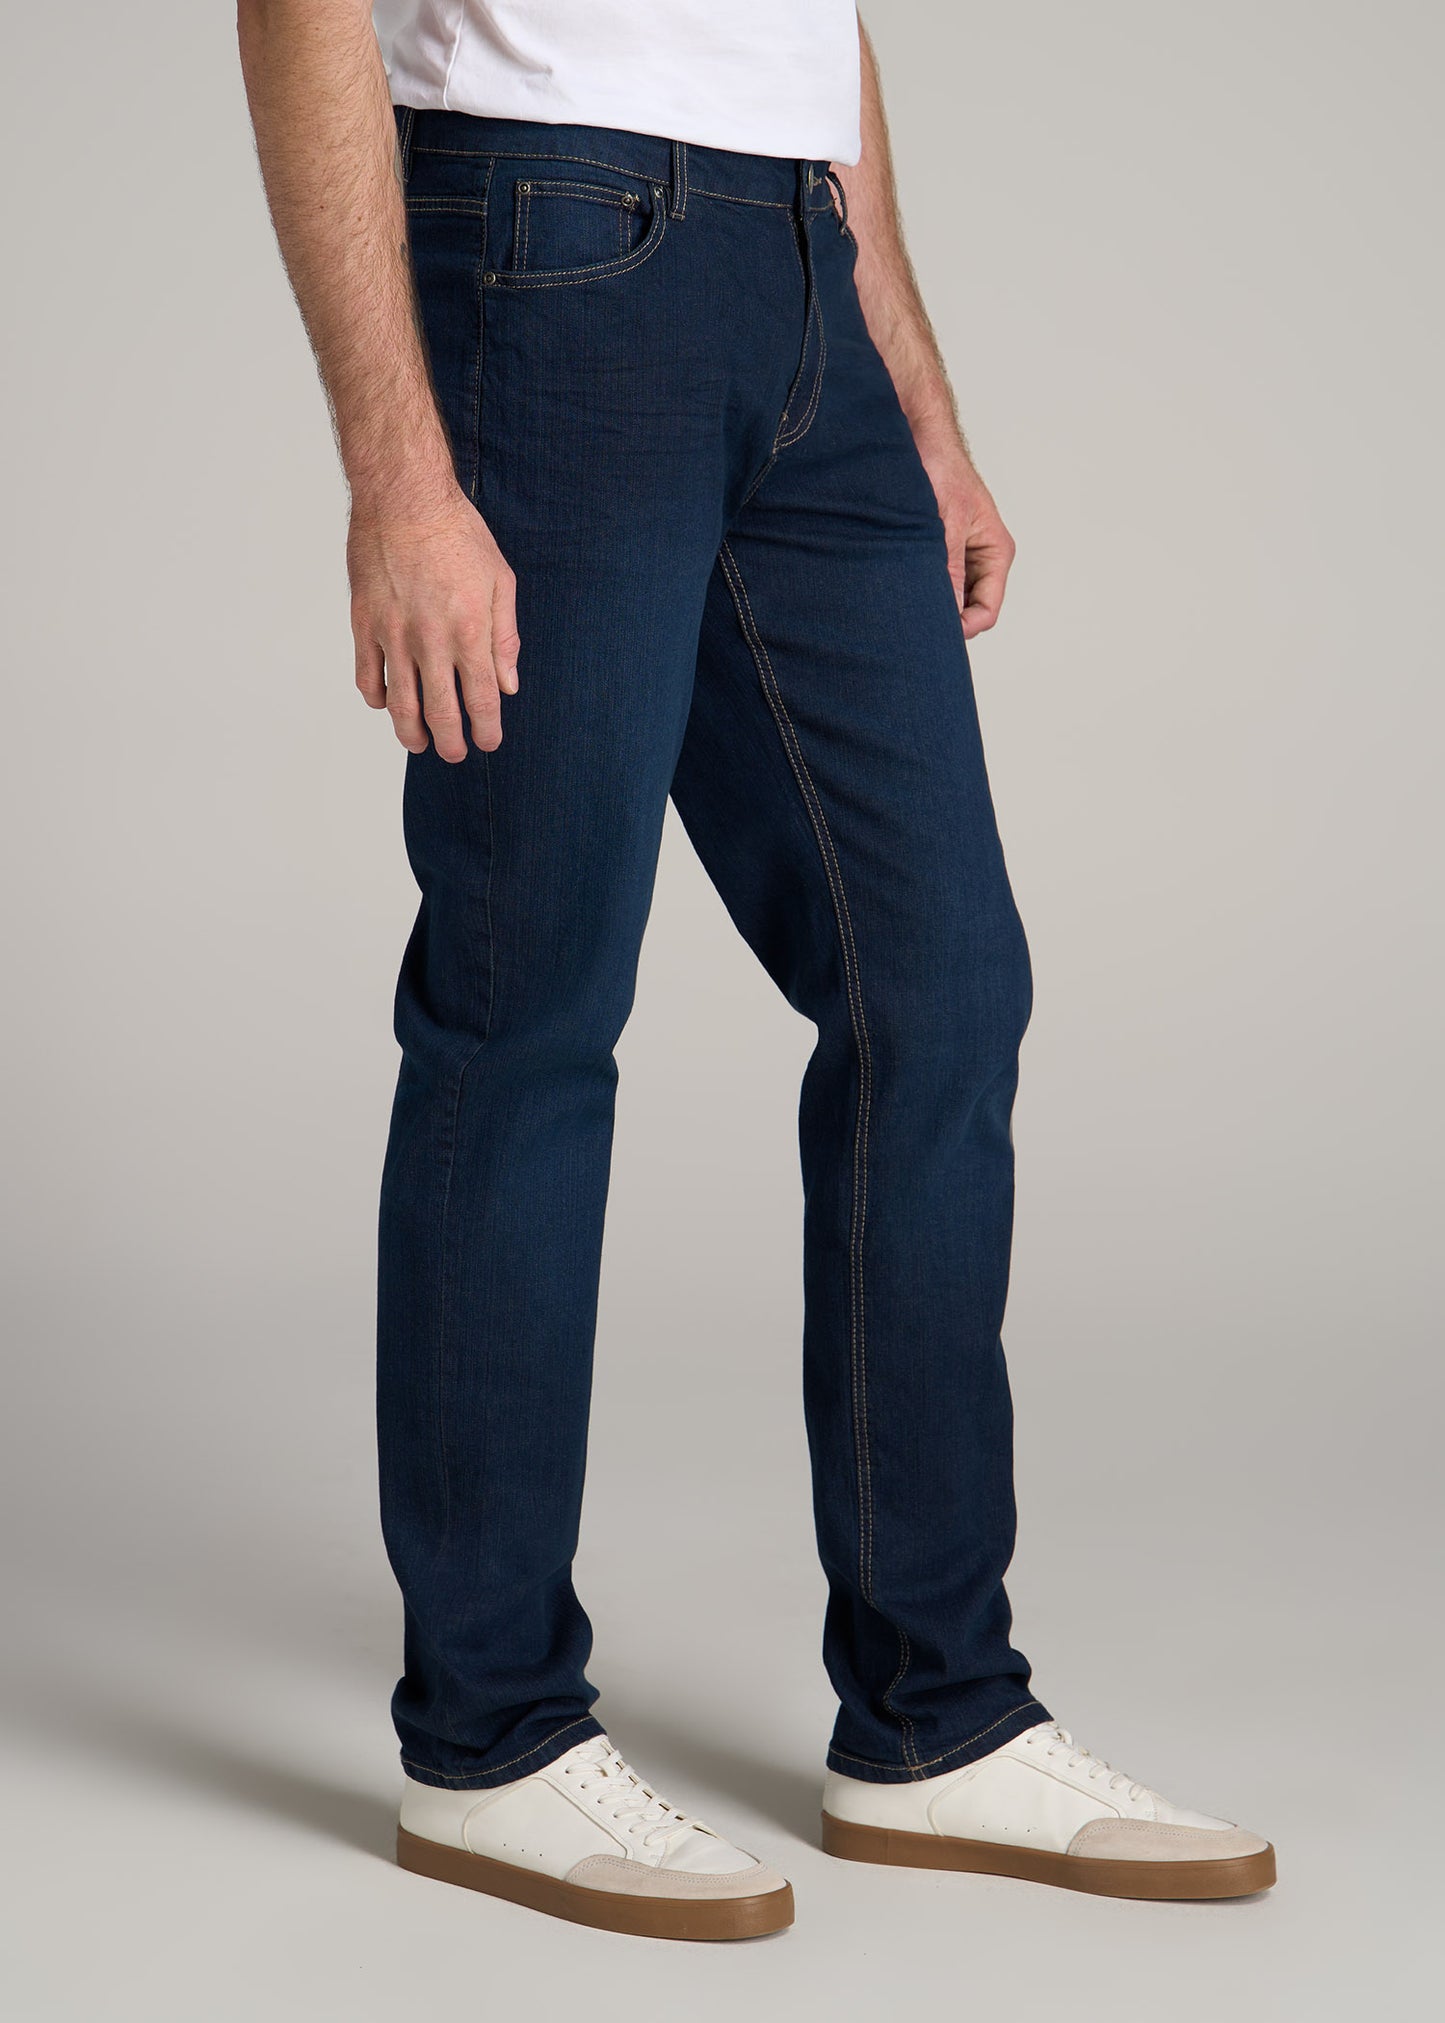 Mason RELAXED Jeans for Tall Men in Blue Steel